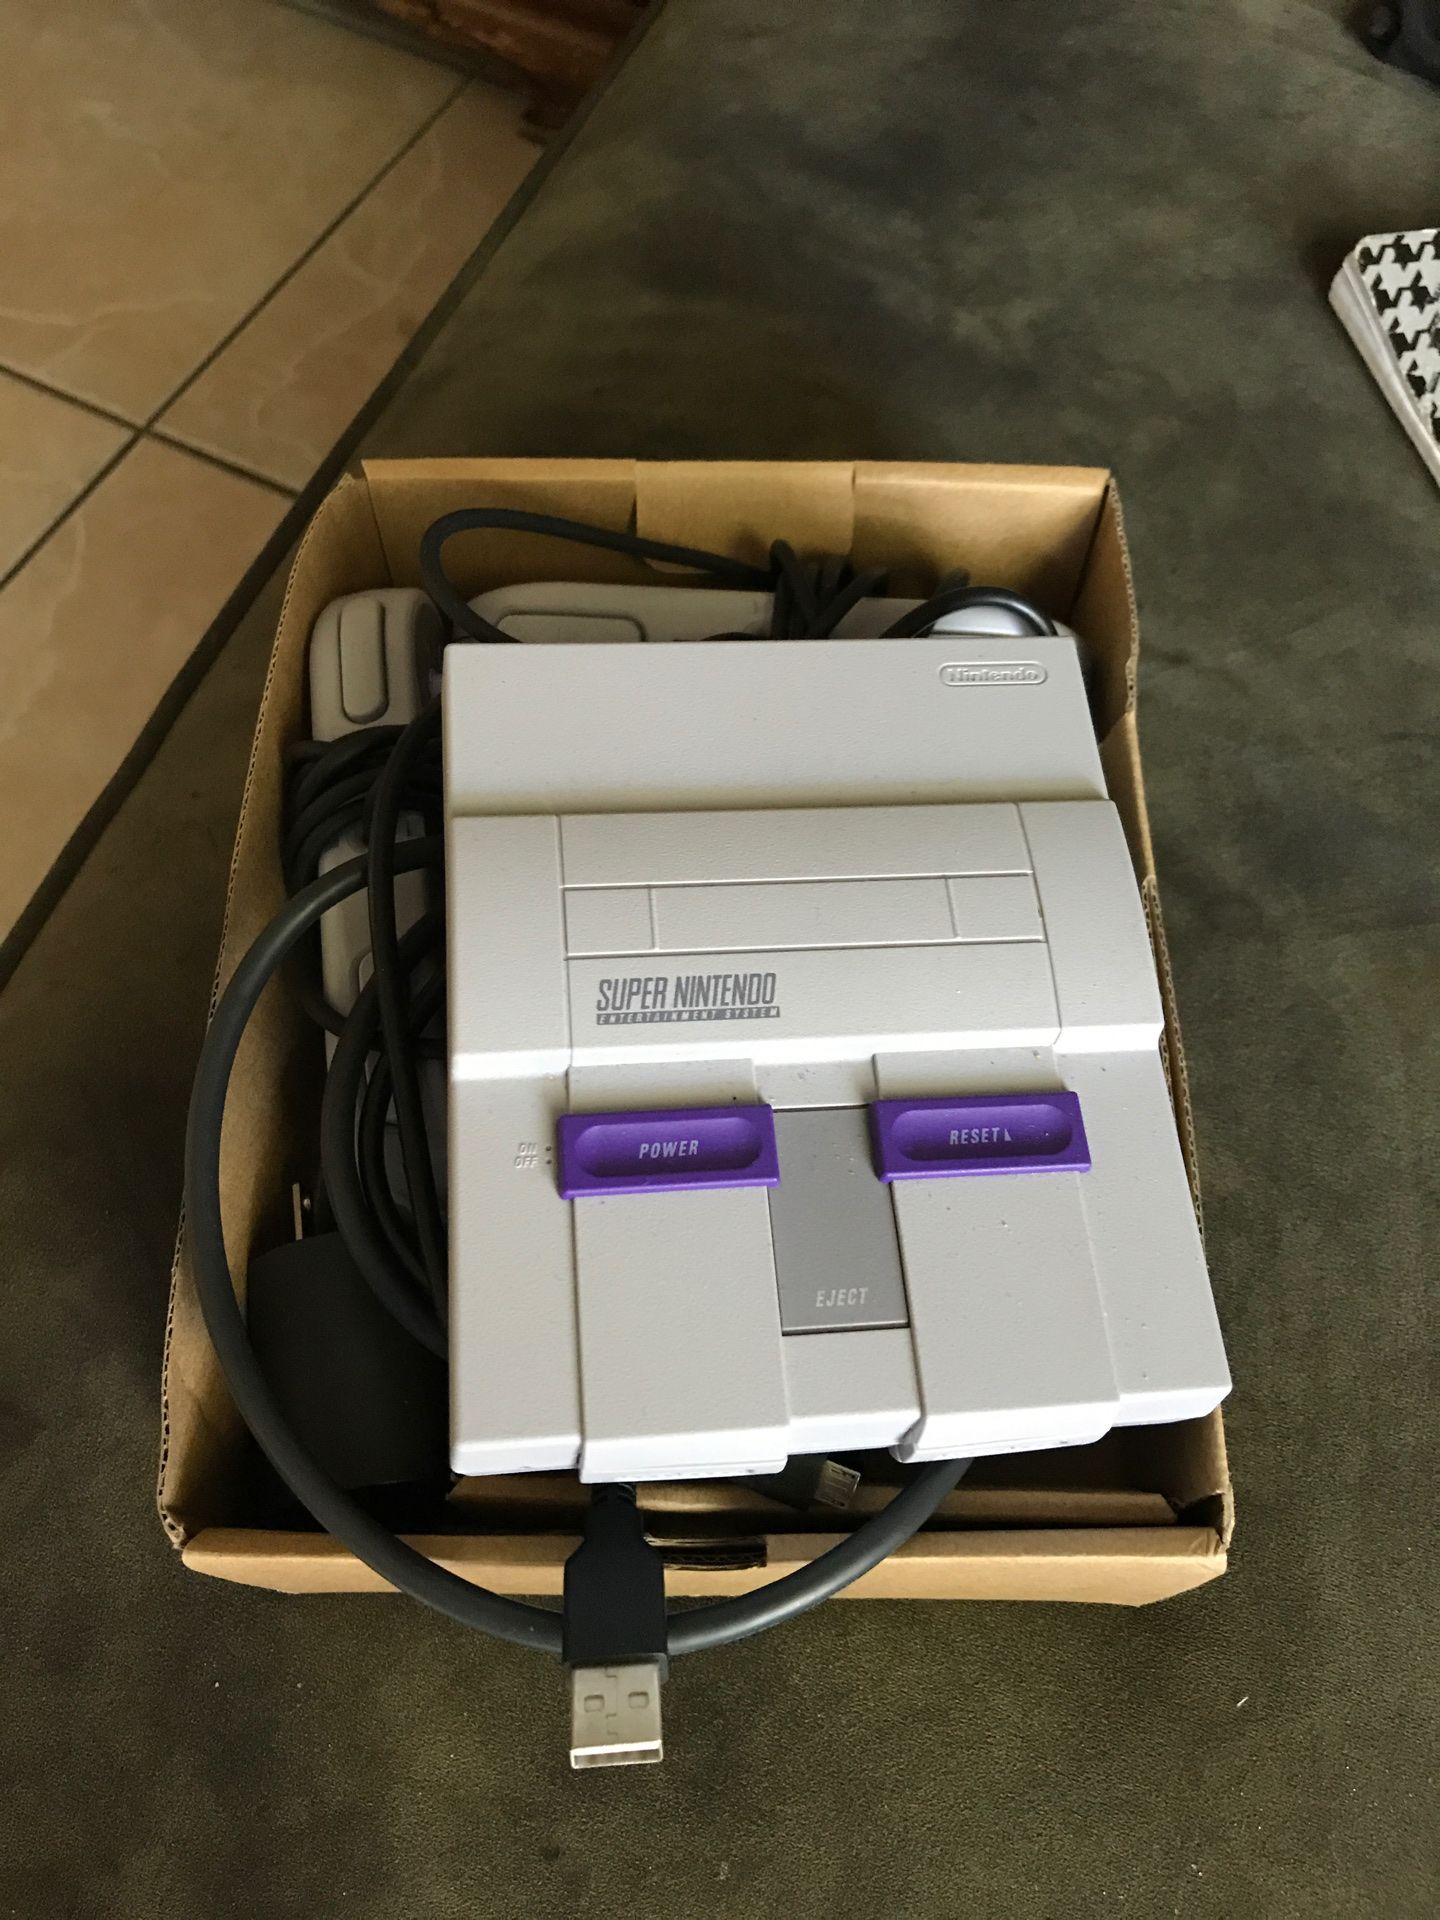 Super Nintendo Mini with 2 Controllers and games installed